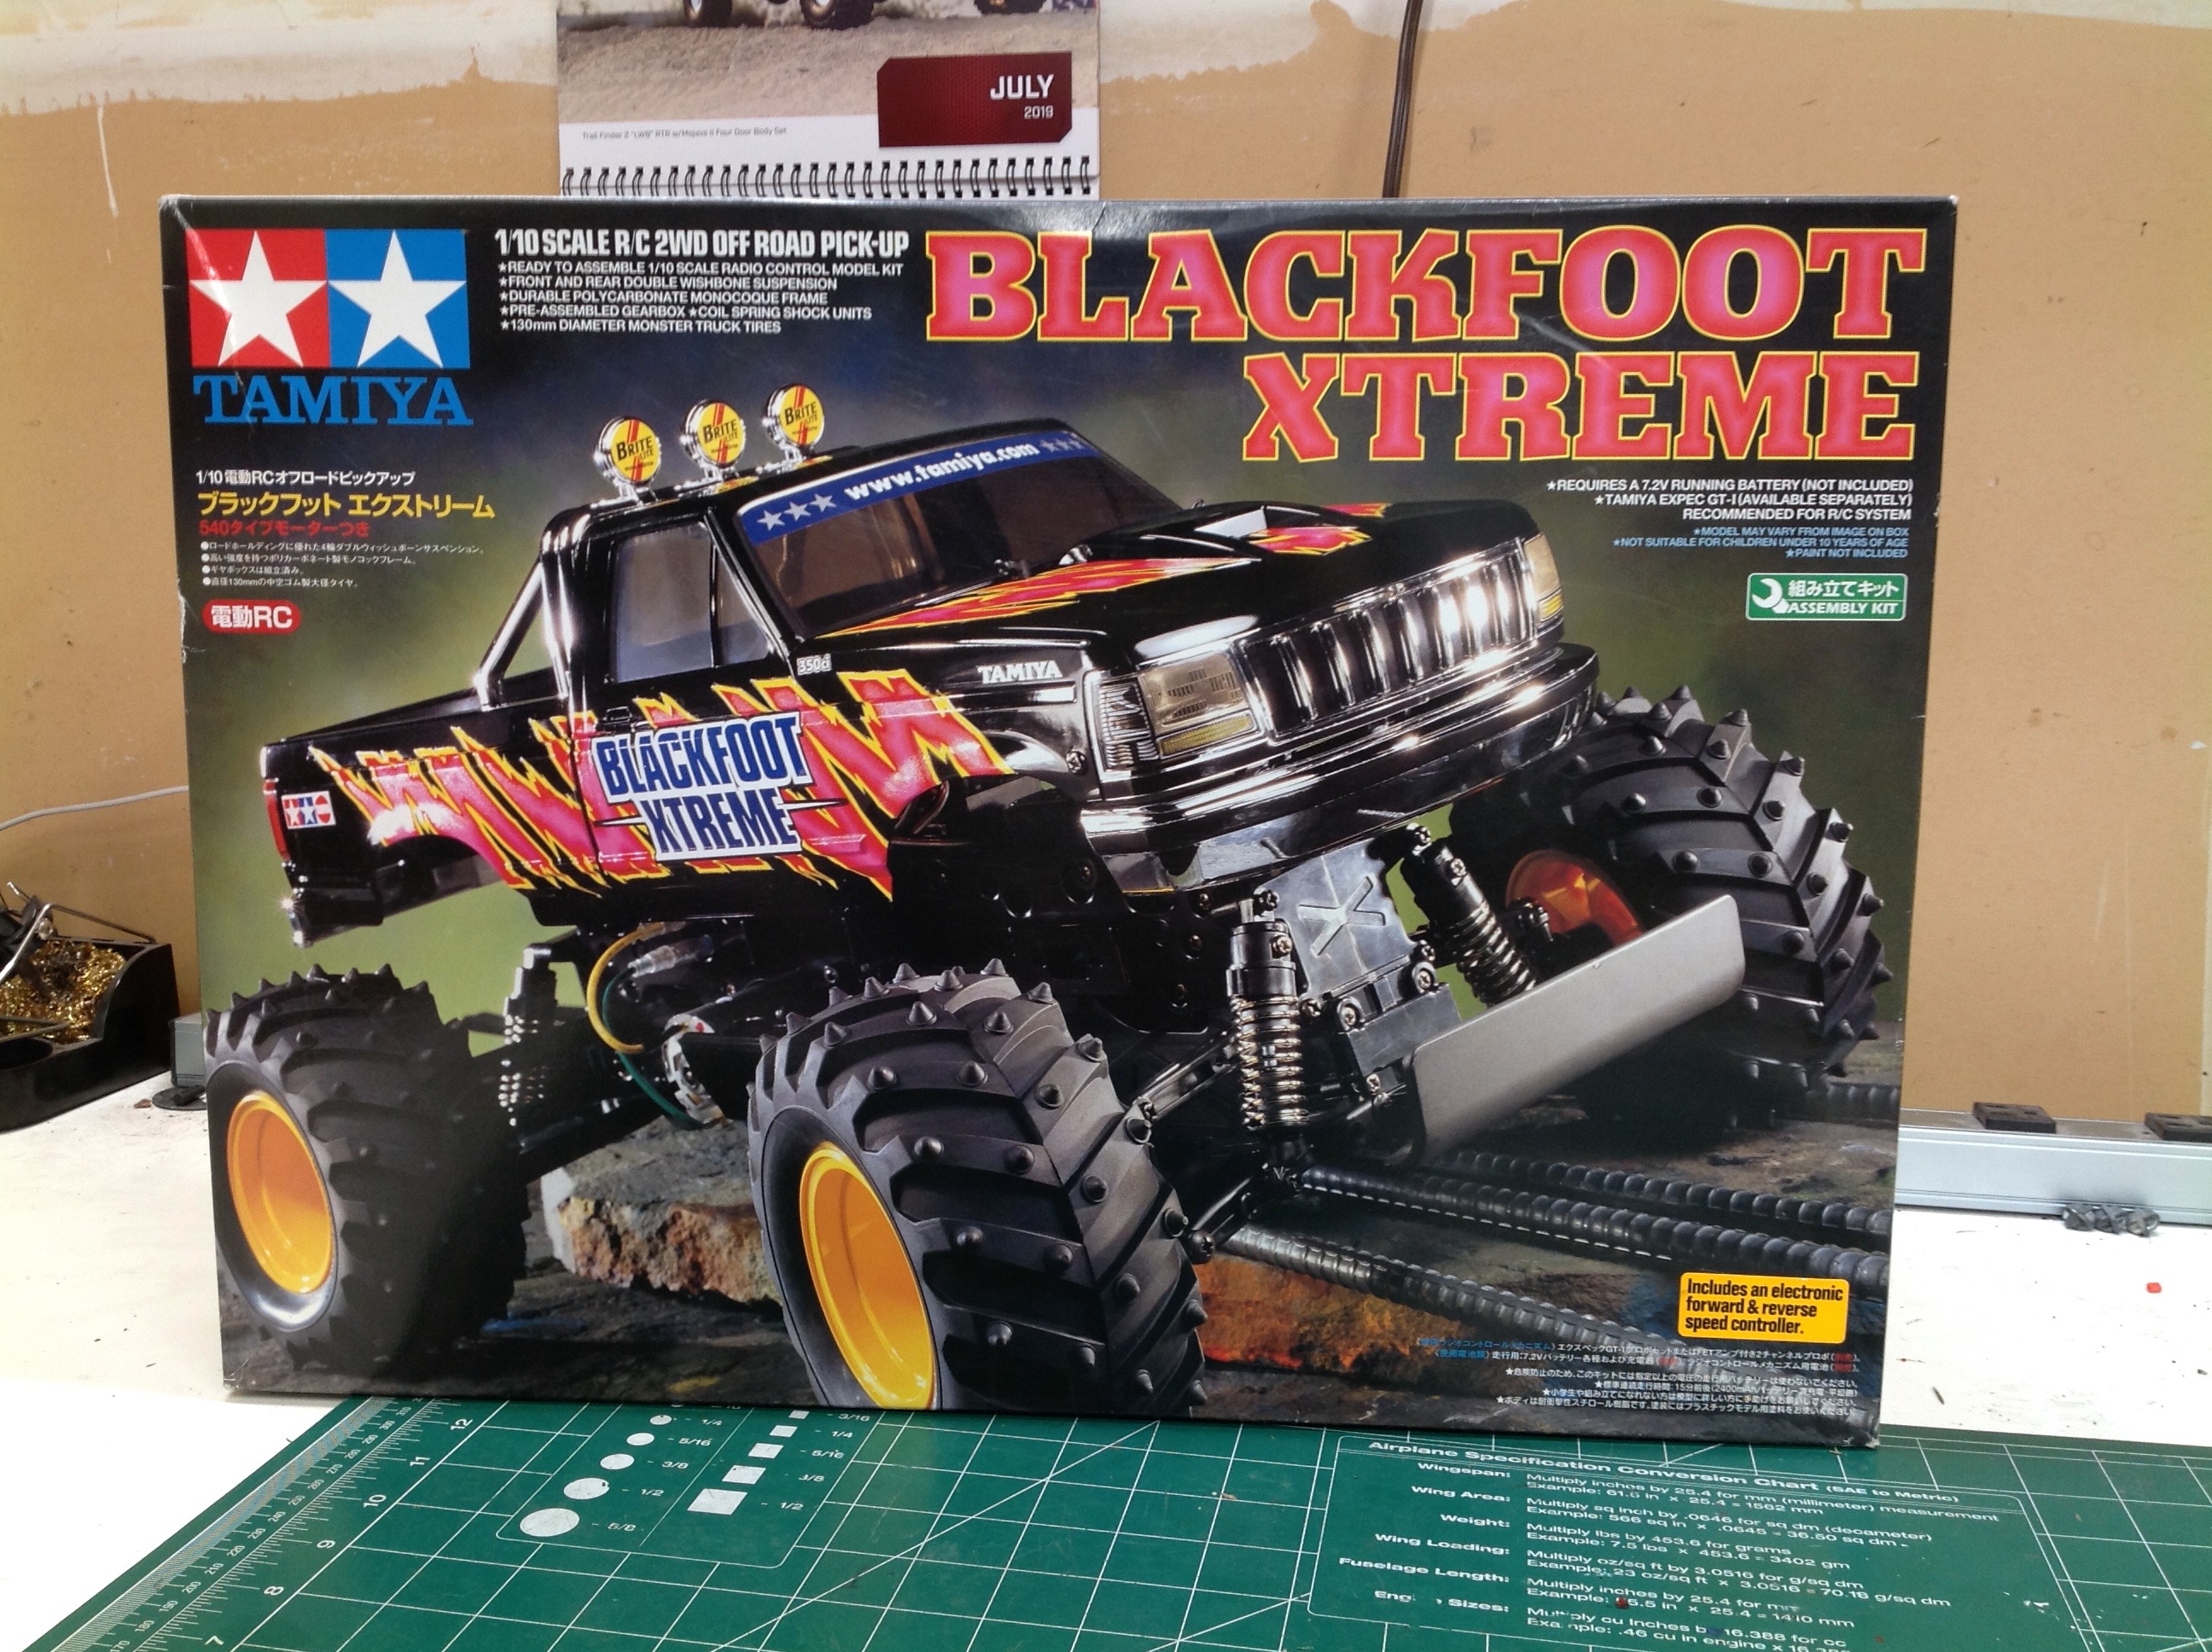 Blackfoot Xtreme Project